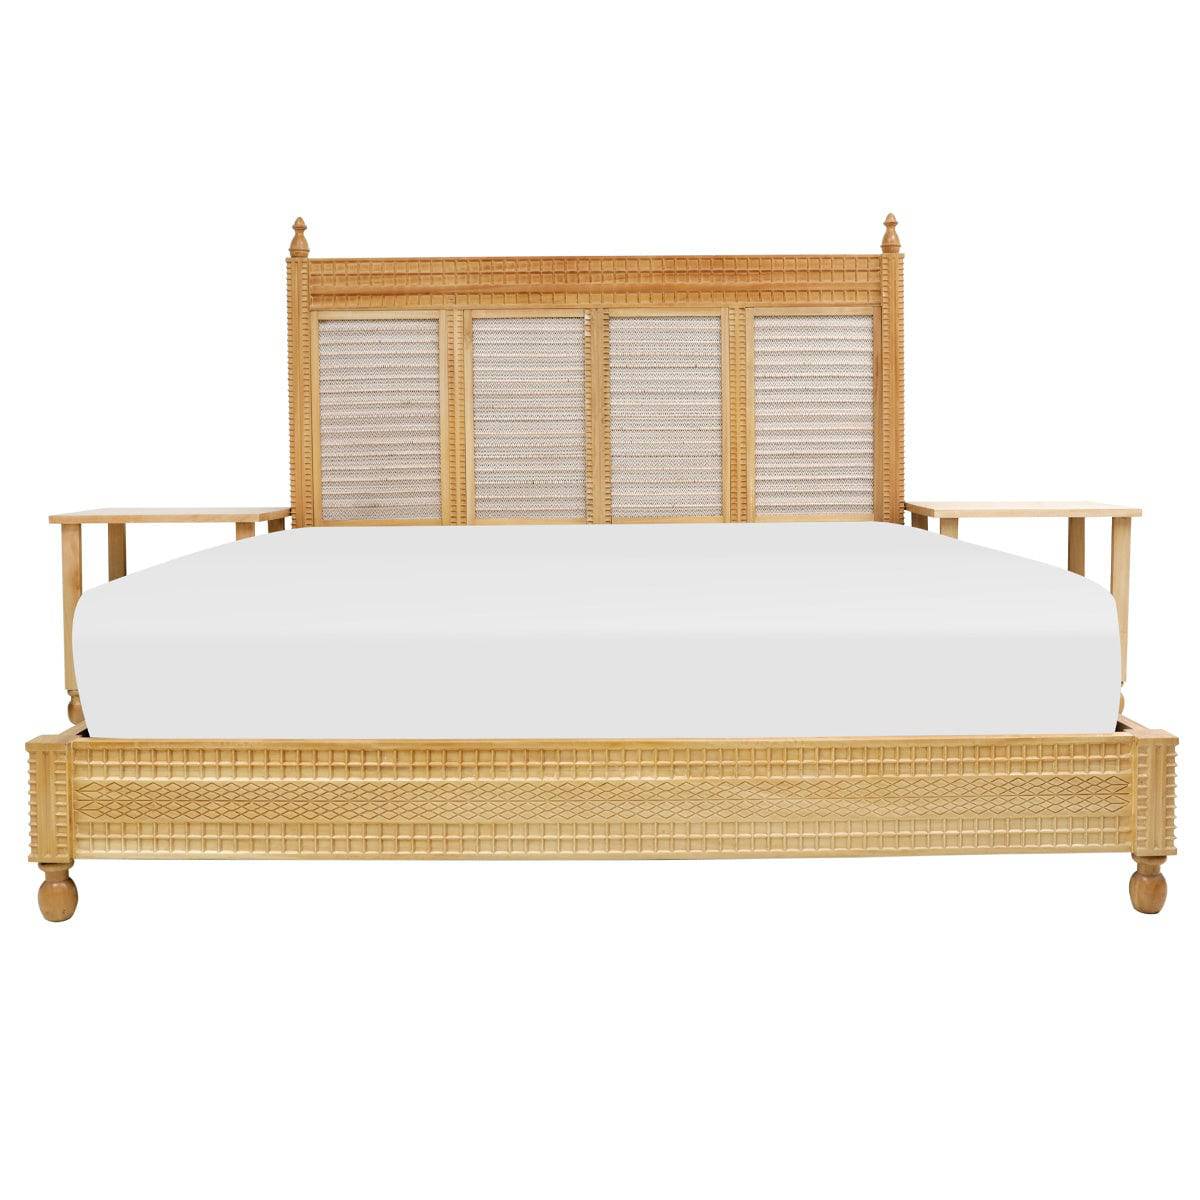 Jharoka King Size Bed with Side Tables